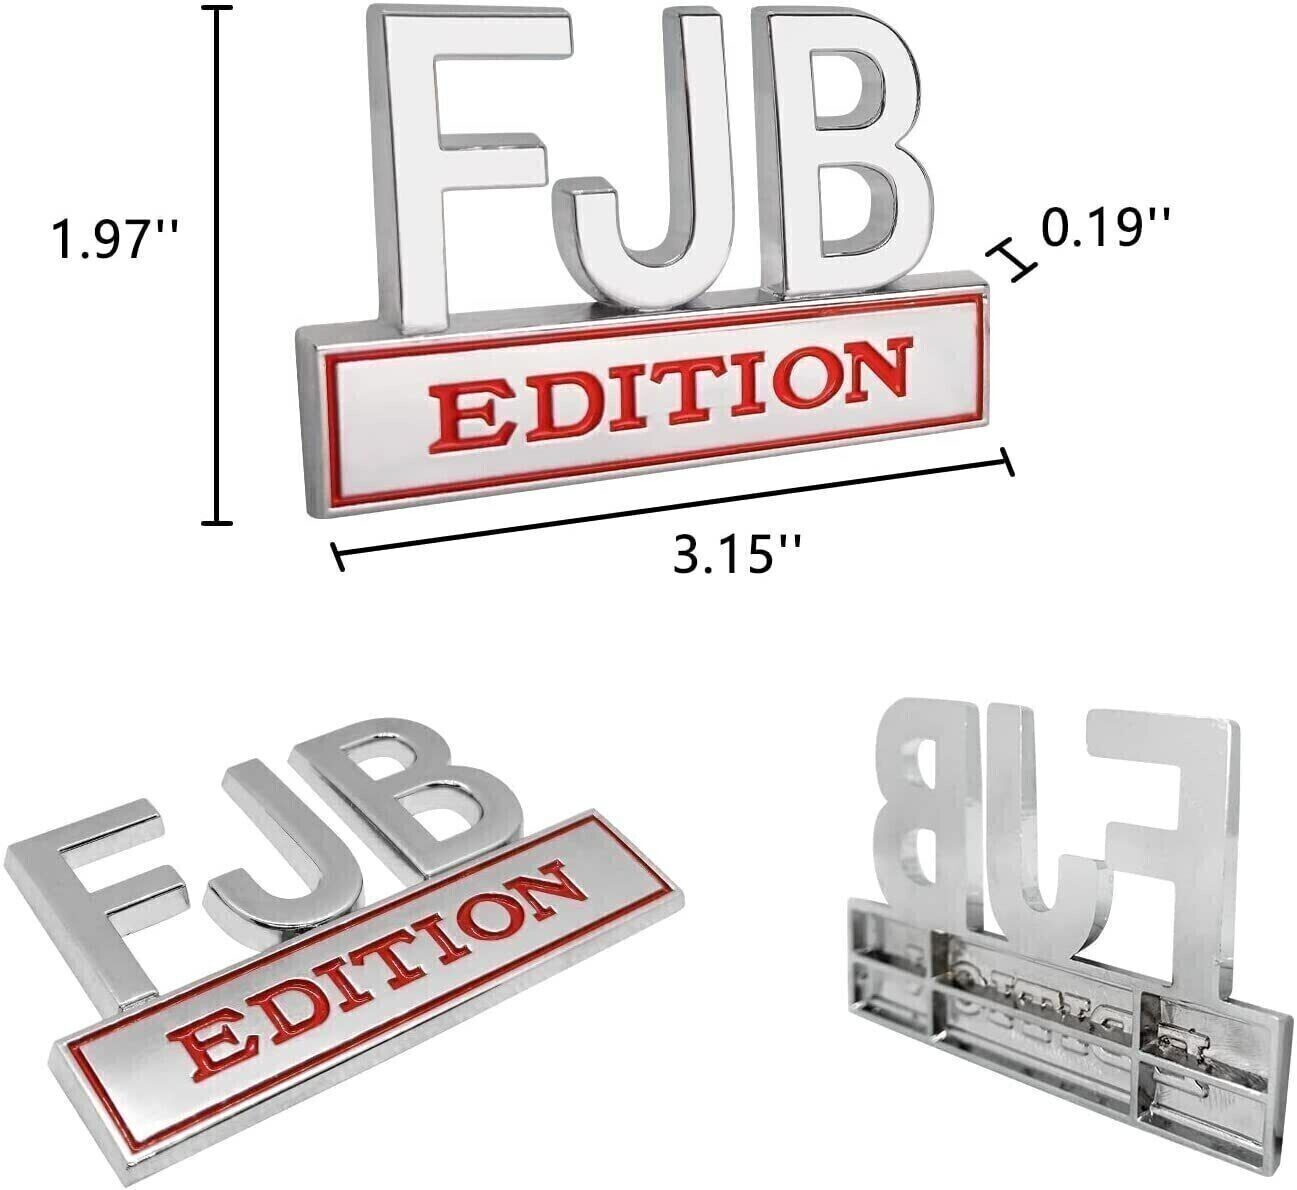 2X FJB EDITION Emblem Badge 3D Letters Sticker Decal for Chevy Fit All Car Truck